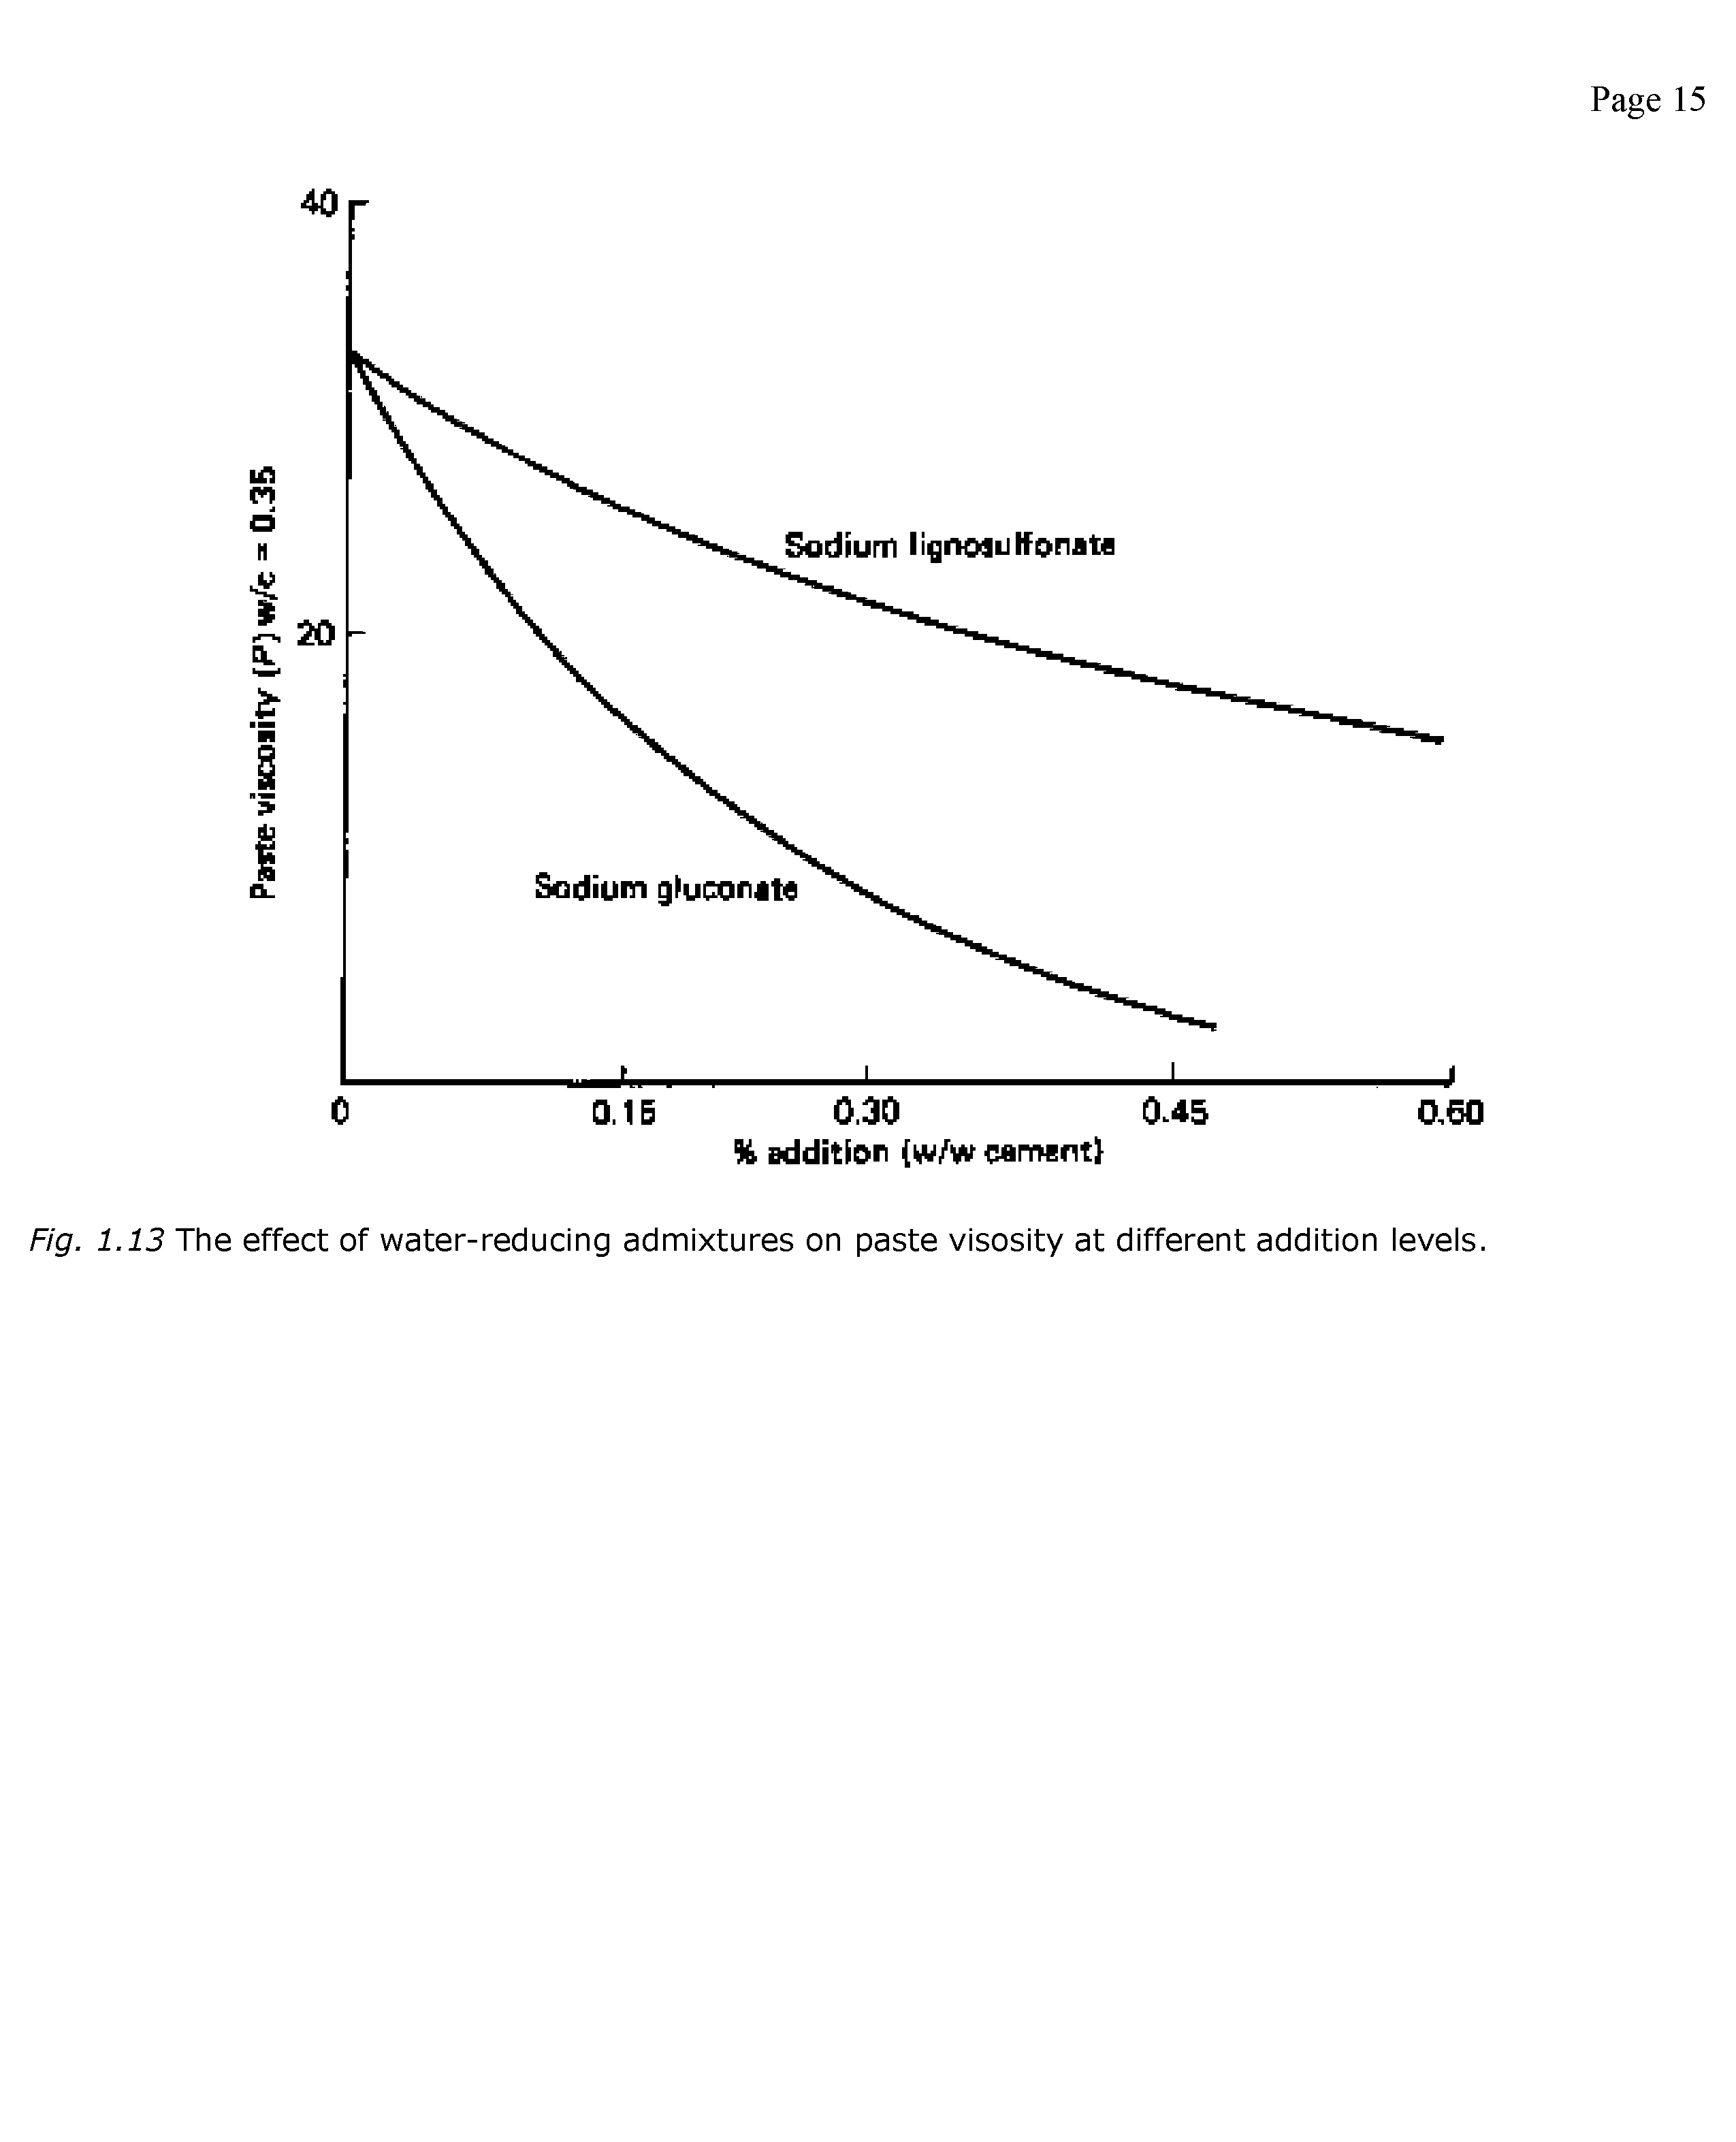 Fig. 1.13 The effect of water-reducing admixtures on paste visosity at different addition levels.